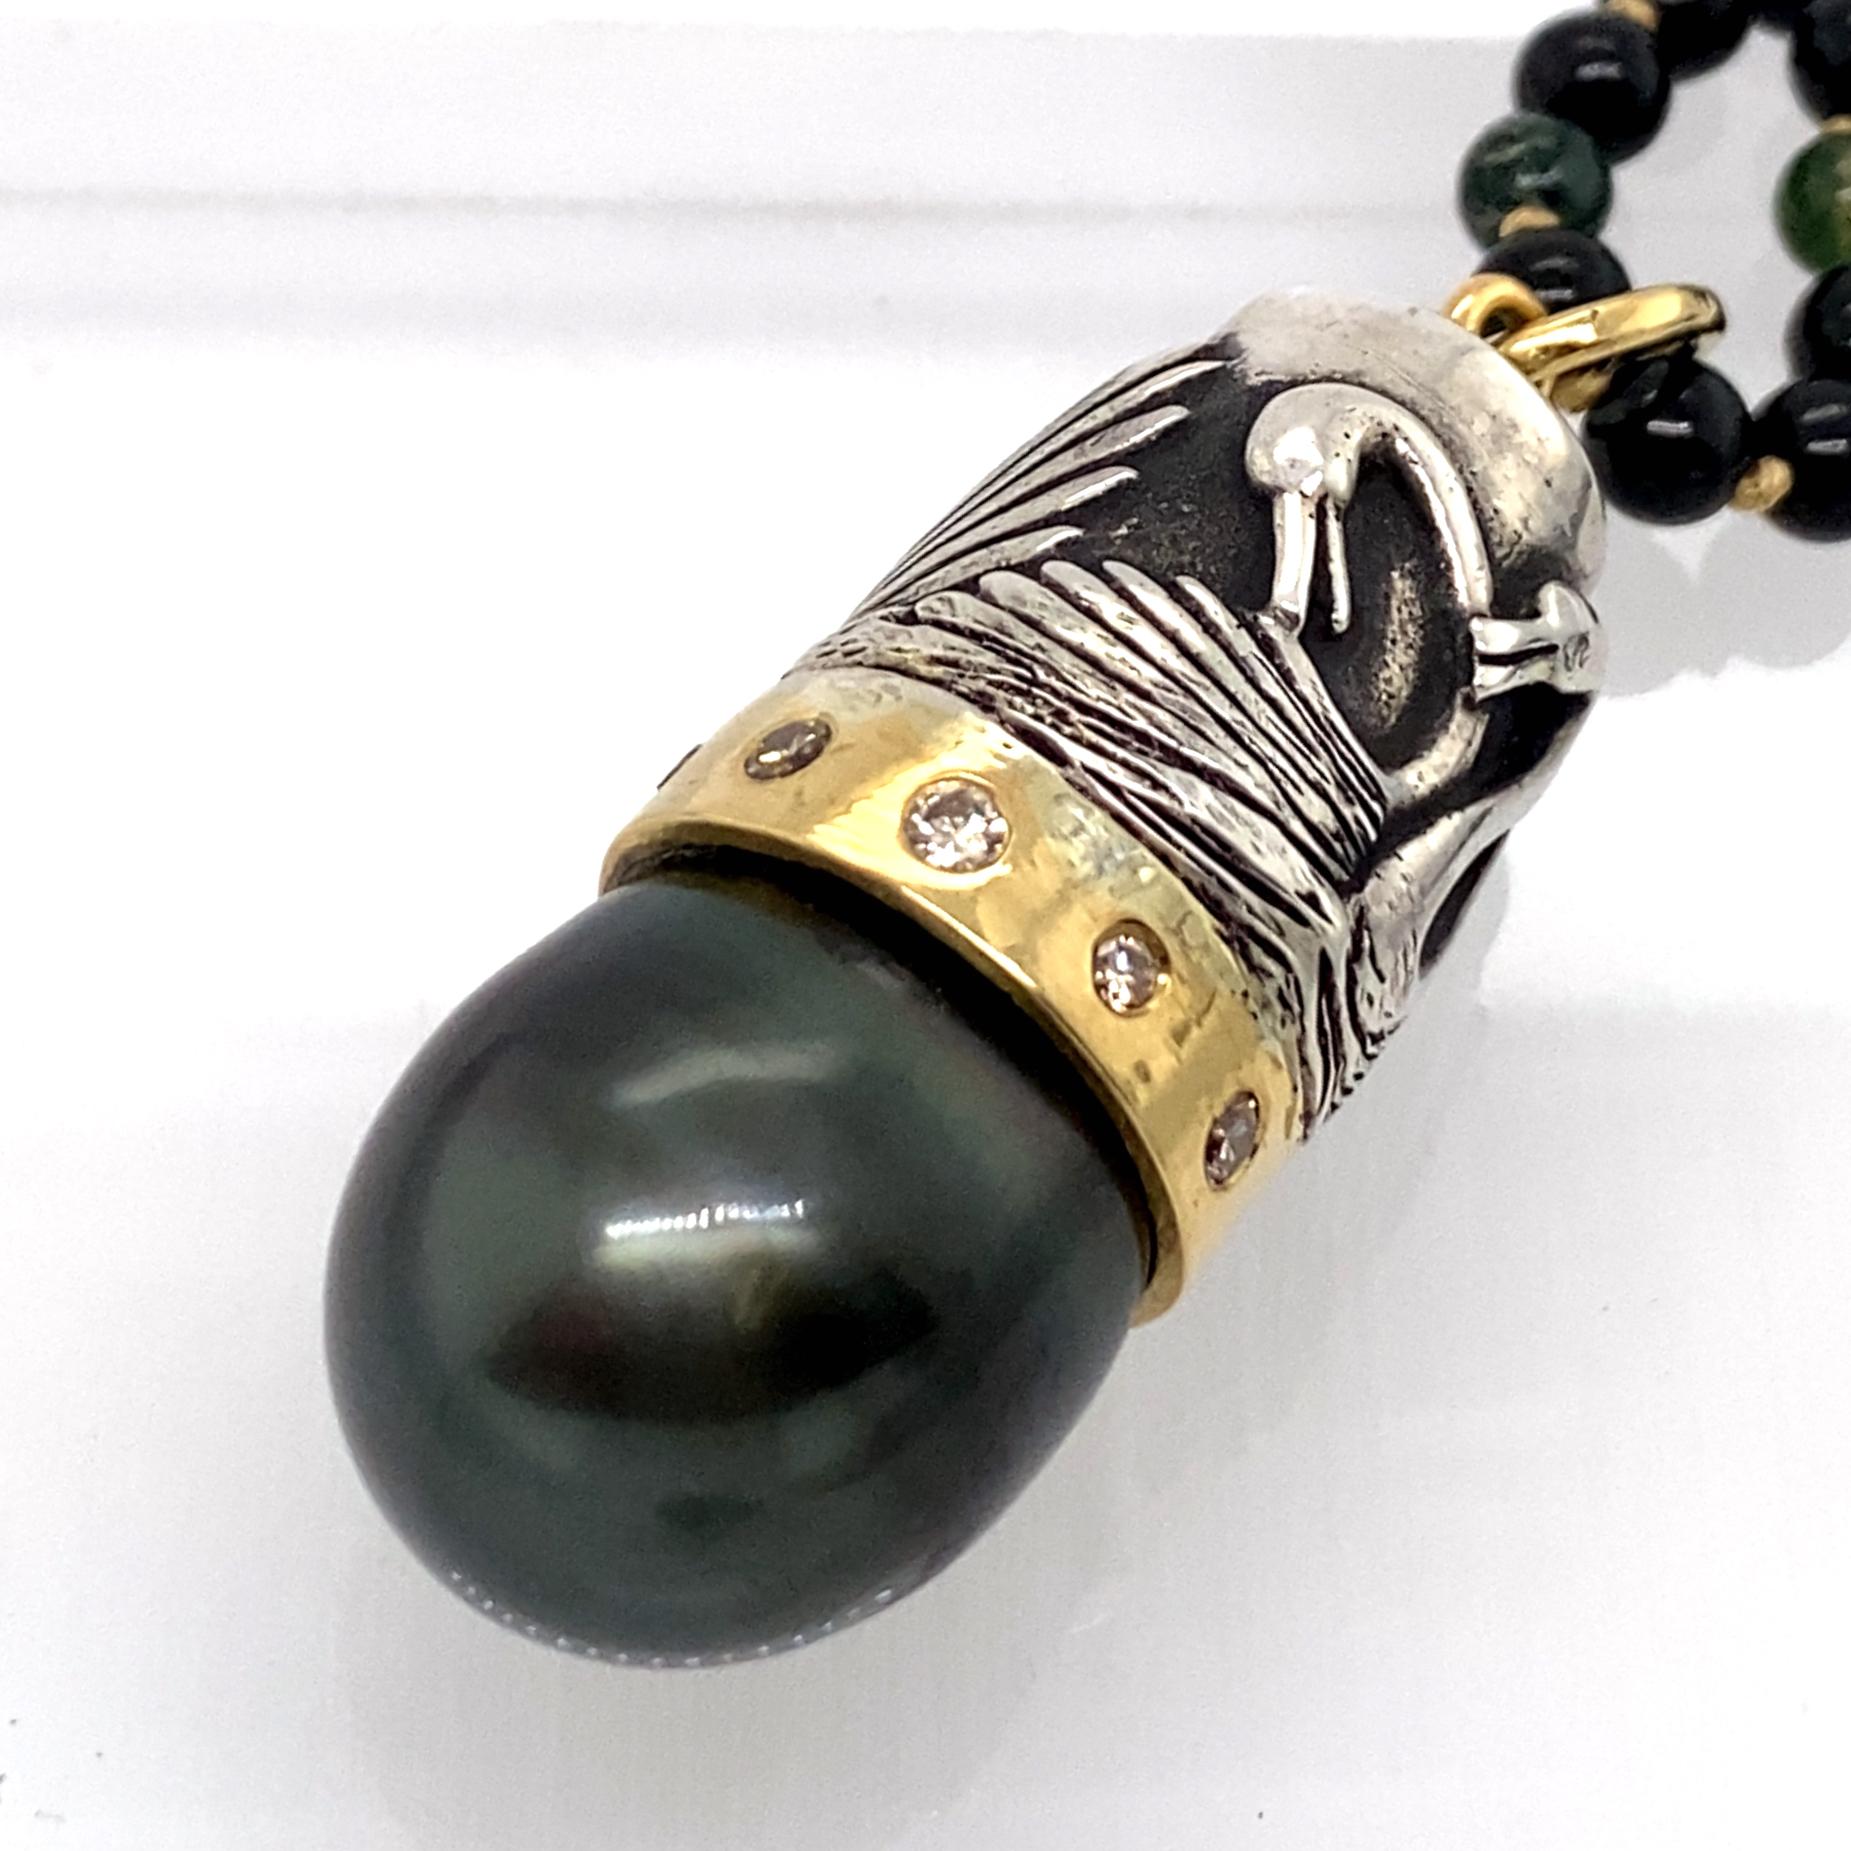 Tahitian Pearl Fob with 18K Gold & Diamond Bezel Topped by Sterling Swan Thimble In Excellent Condition For Sale In Sherman Oaks, CA